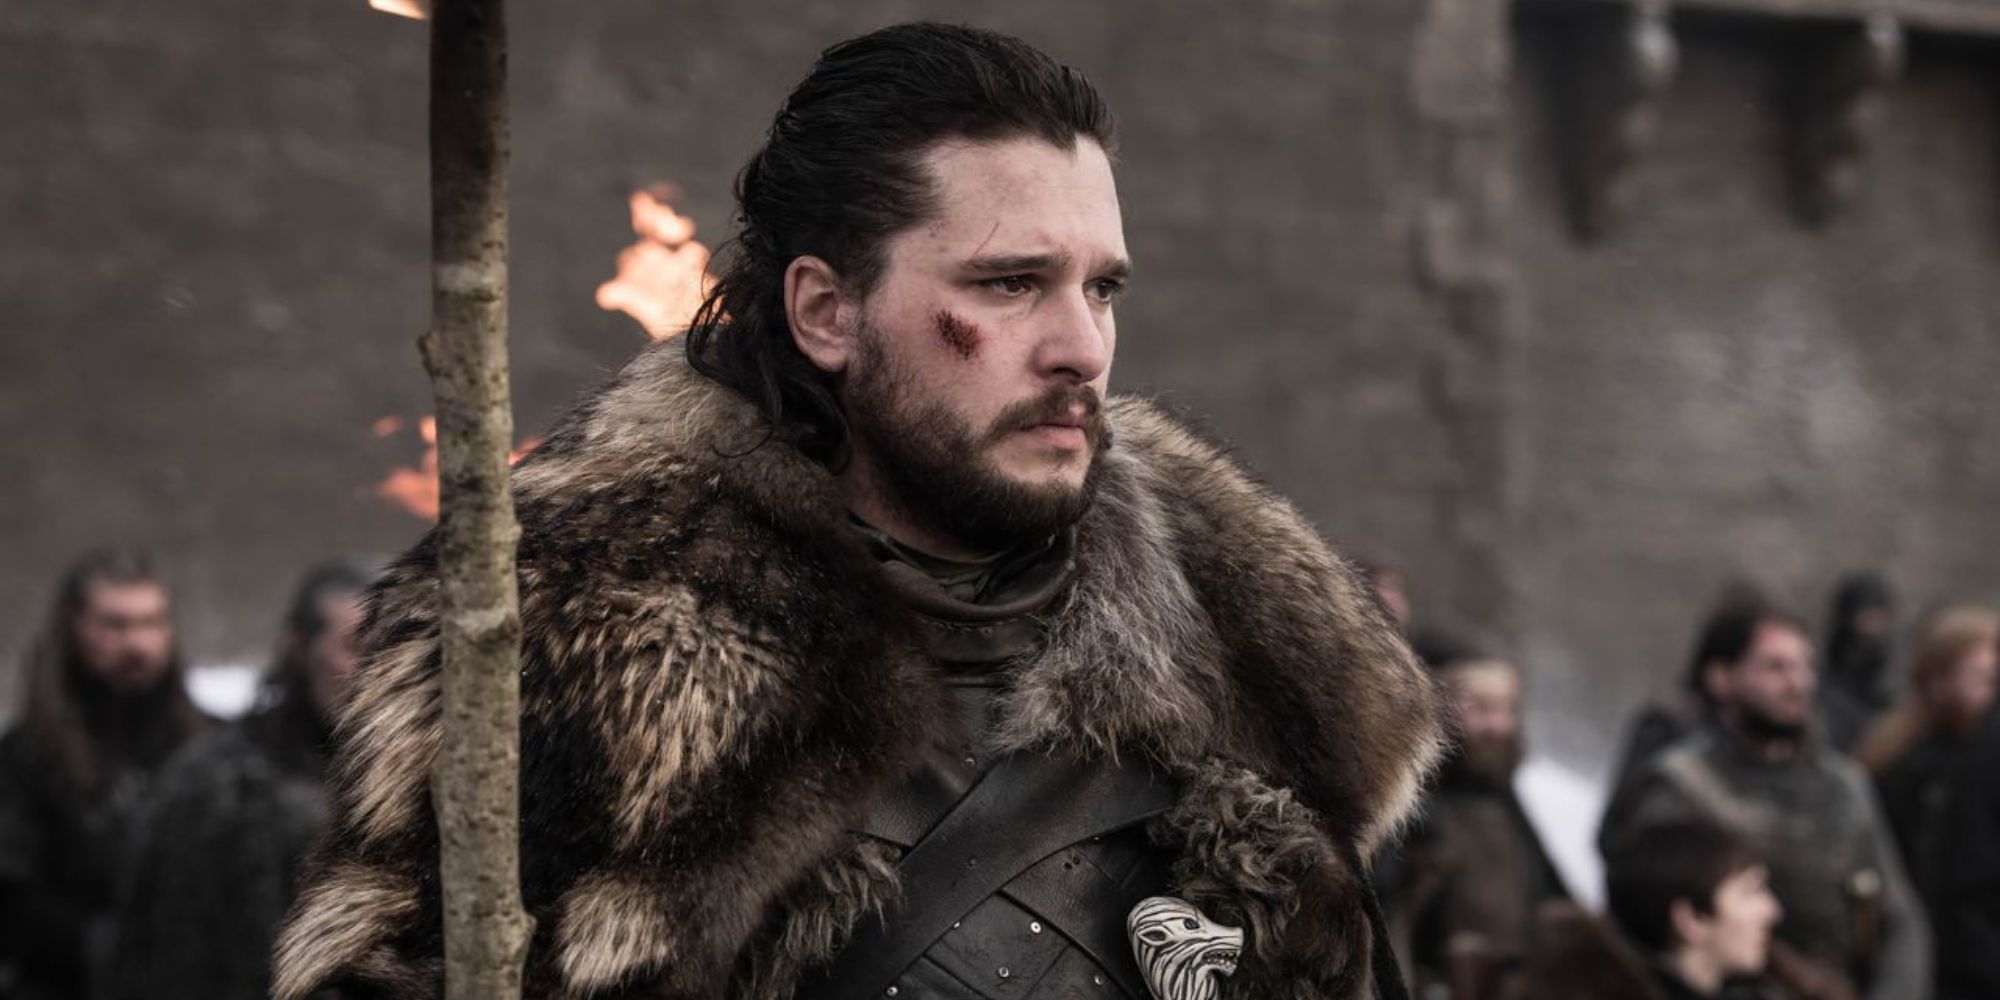 Kit Harington as Jon Snow looking solemn while at a funeral in Game of Thrones.